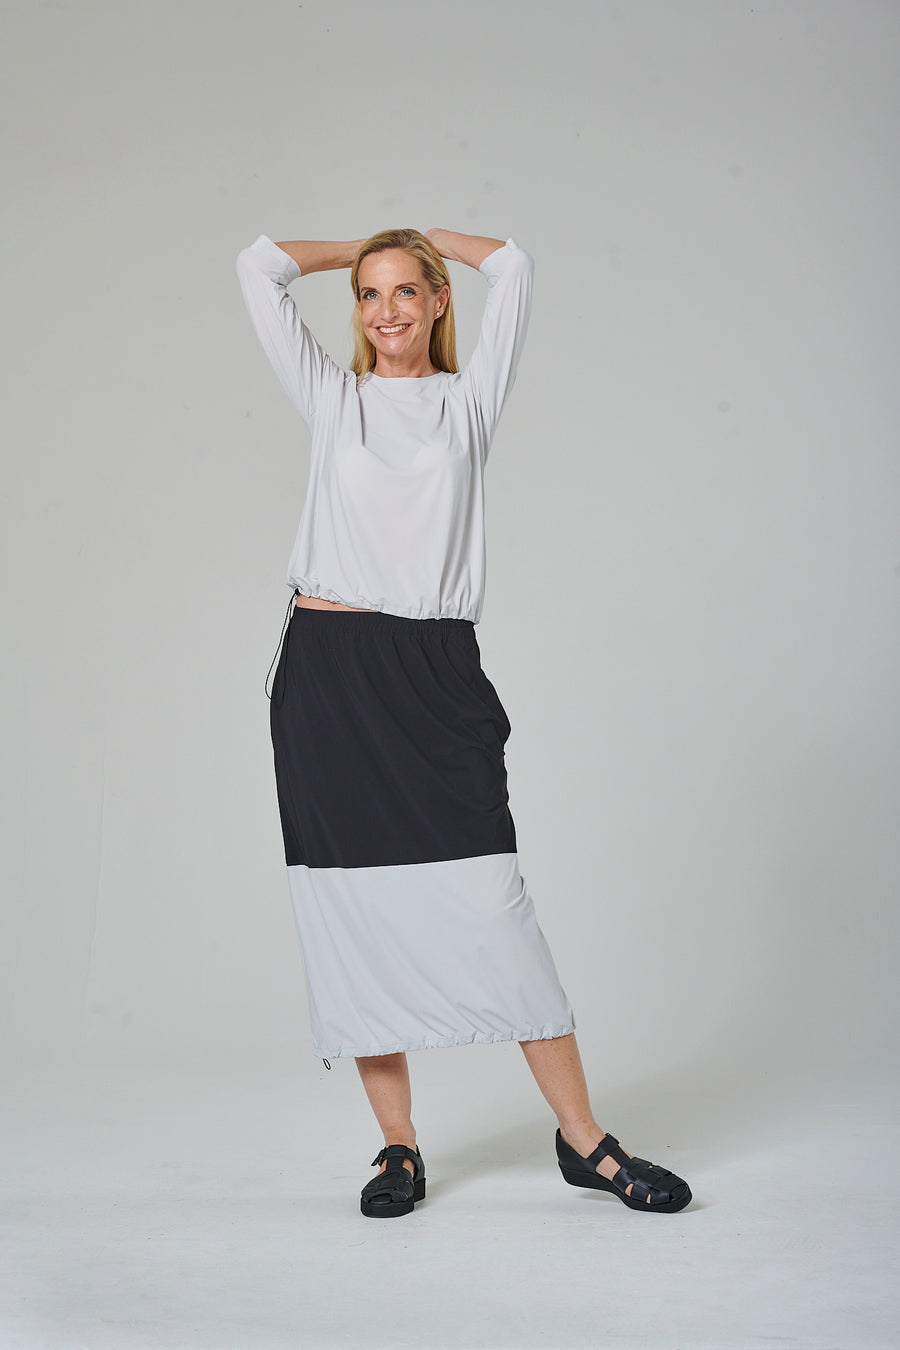 Skirt made of techno jersey (321r1) in two colors or plain